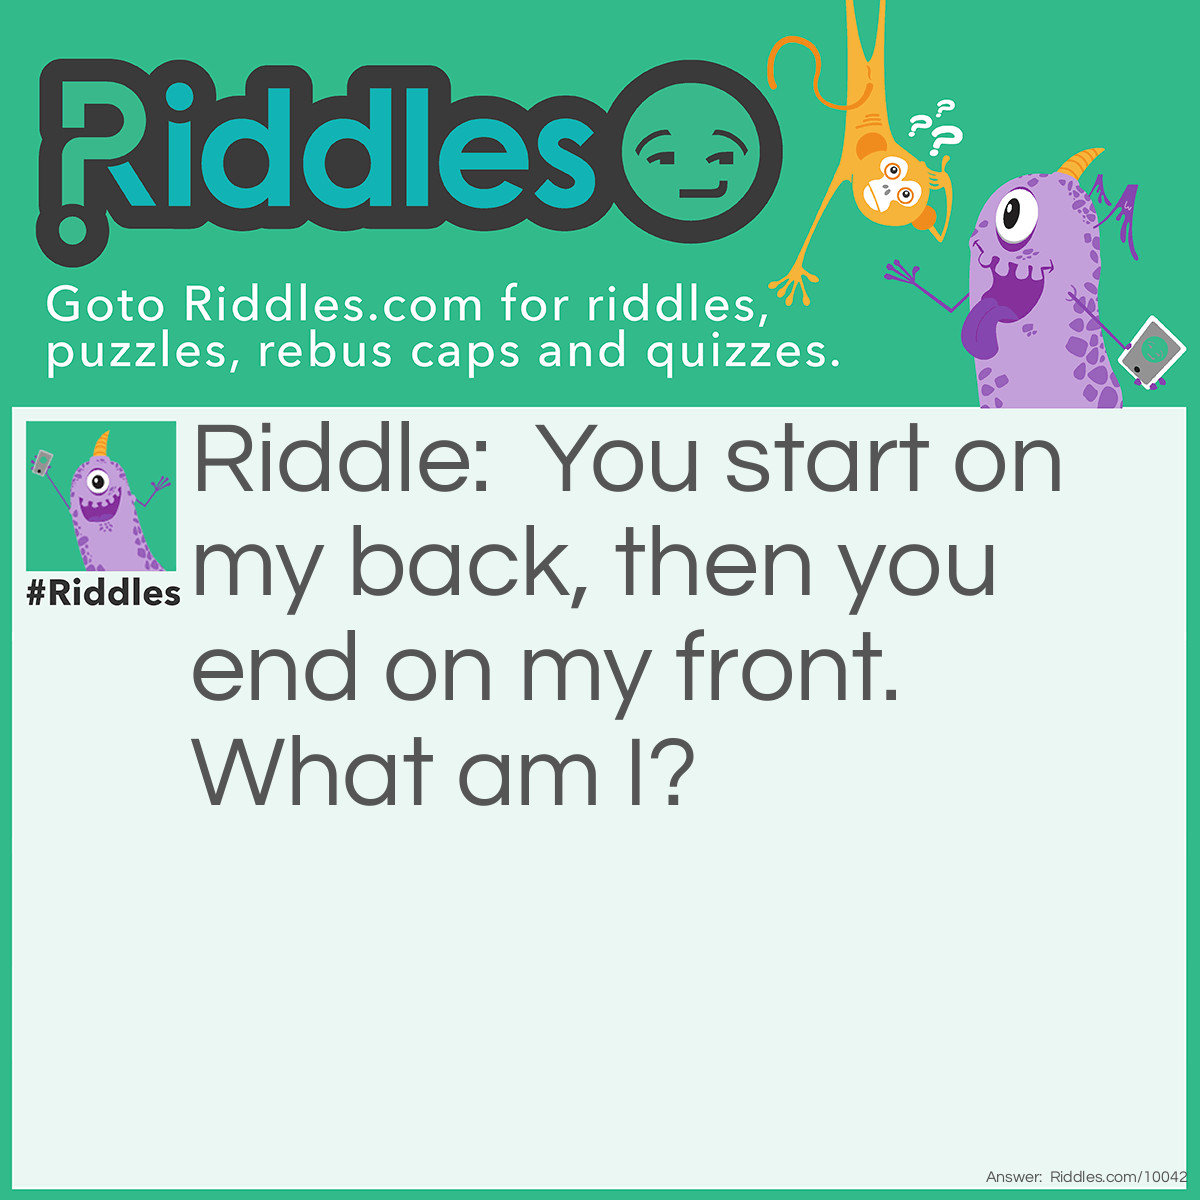 Riddle: You start on my back, then you end on my front. What am I? Answer: I am a line.